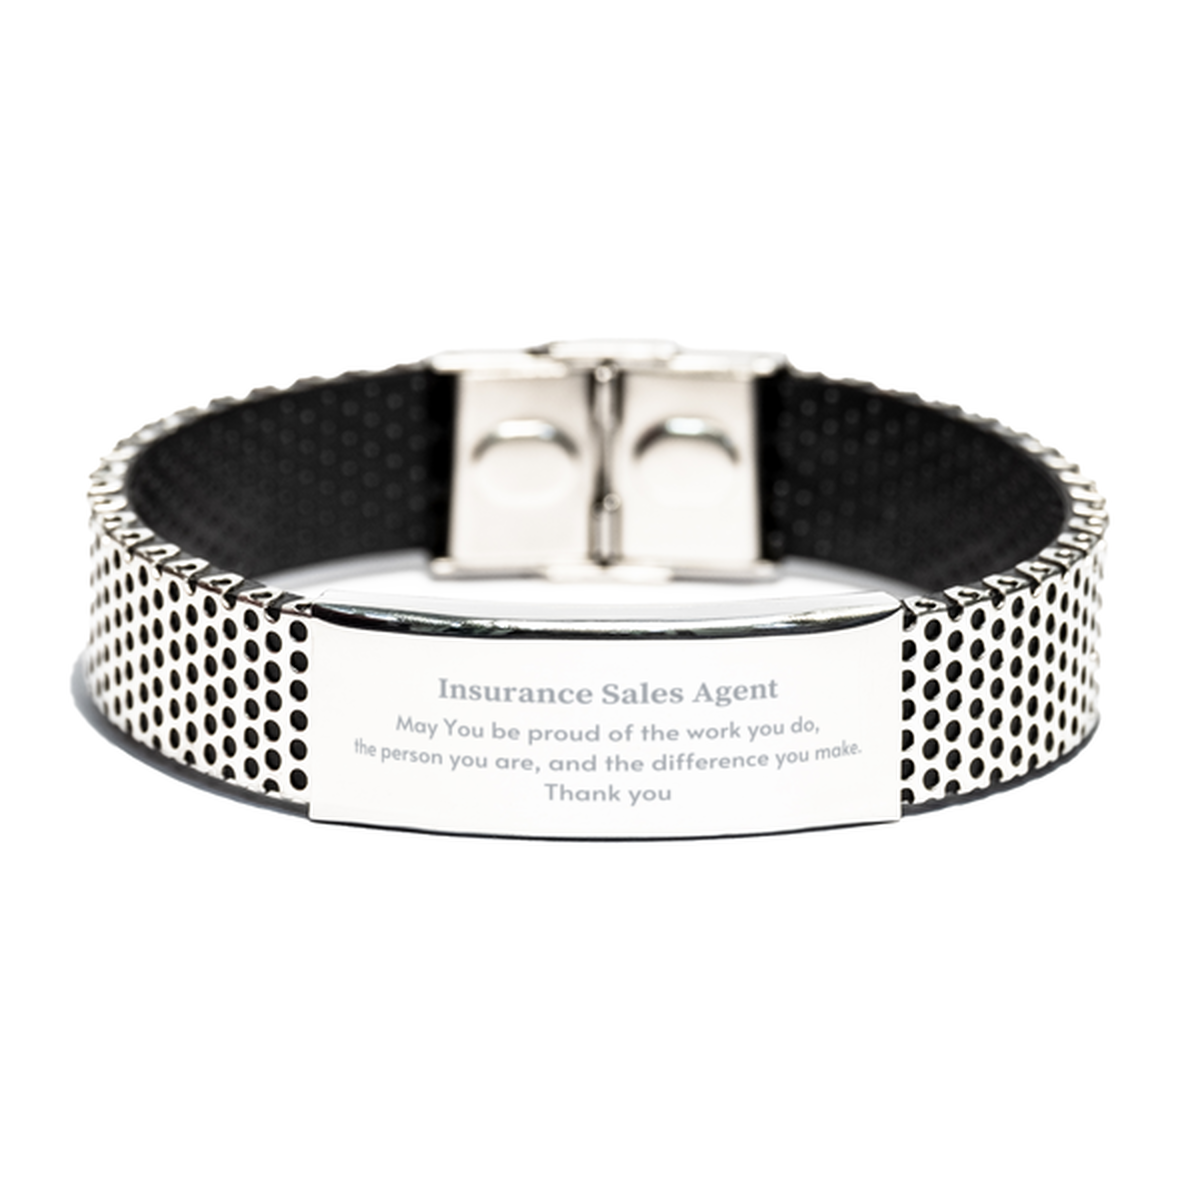 Heartwarming Stainless Steel Bracelet Retirement Coworkers Gifts for Insurance Sales Agent, Insurance Sales Agent May You be proud of the work you do, the person you are Gifts for Boss Men Women Friends